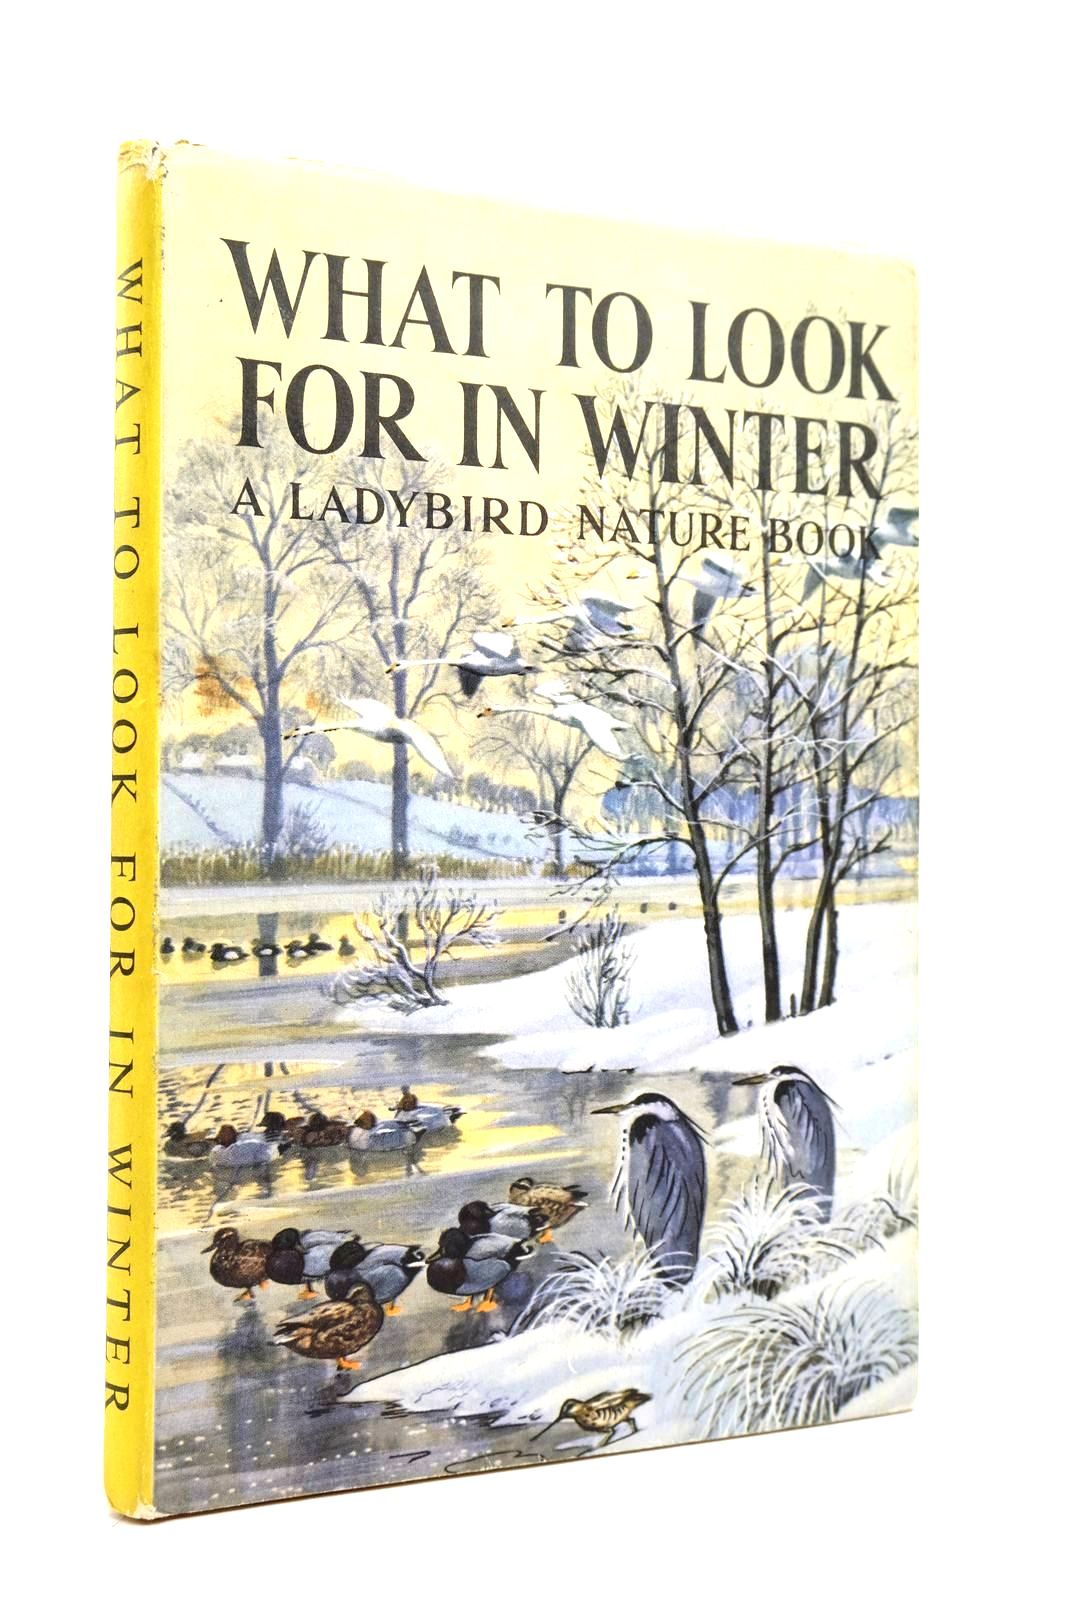 Photo of WHAT TO LOOK FOR IN WINTER written by Watson, E.L. Grant illustrated by Tunnicliffe, C.F. published by Wills &amp; Hepworth Ltd. (STOCK CODE: 2139292)  for sale by Stella & Rose's Books